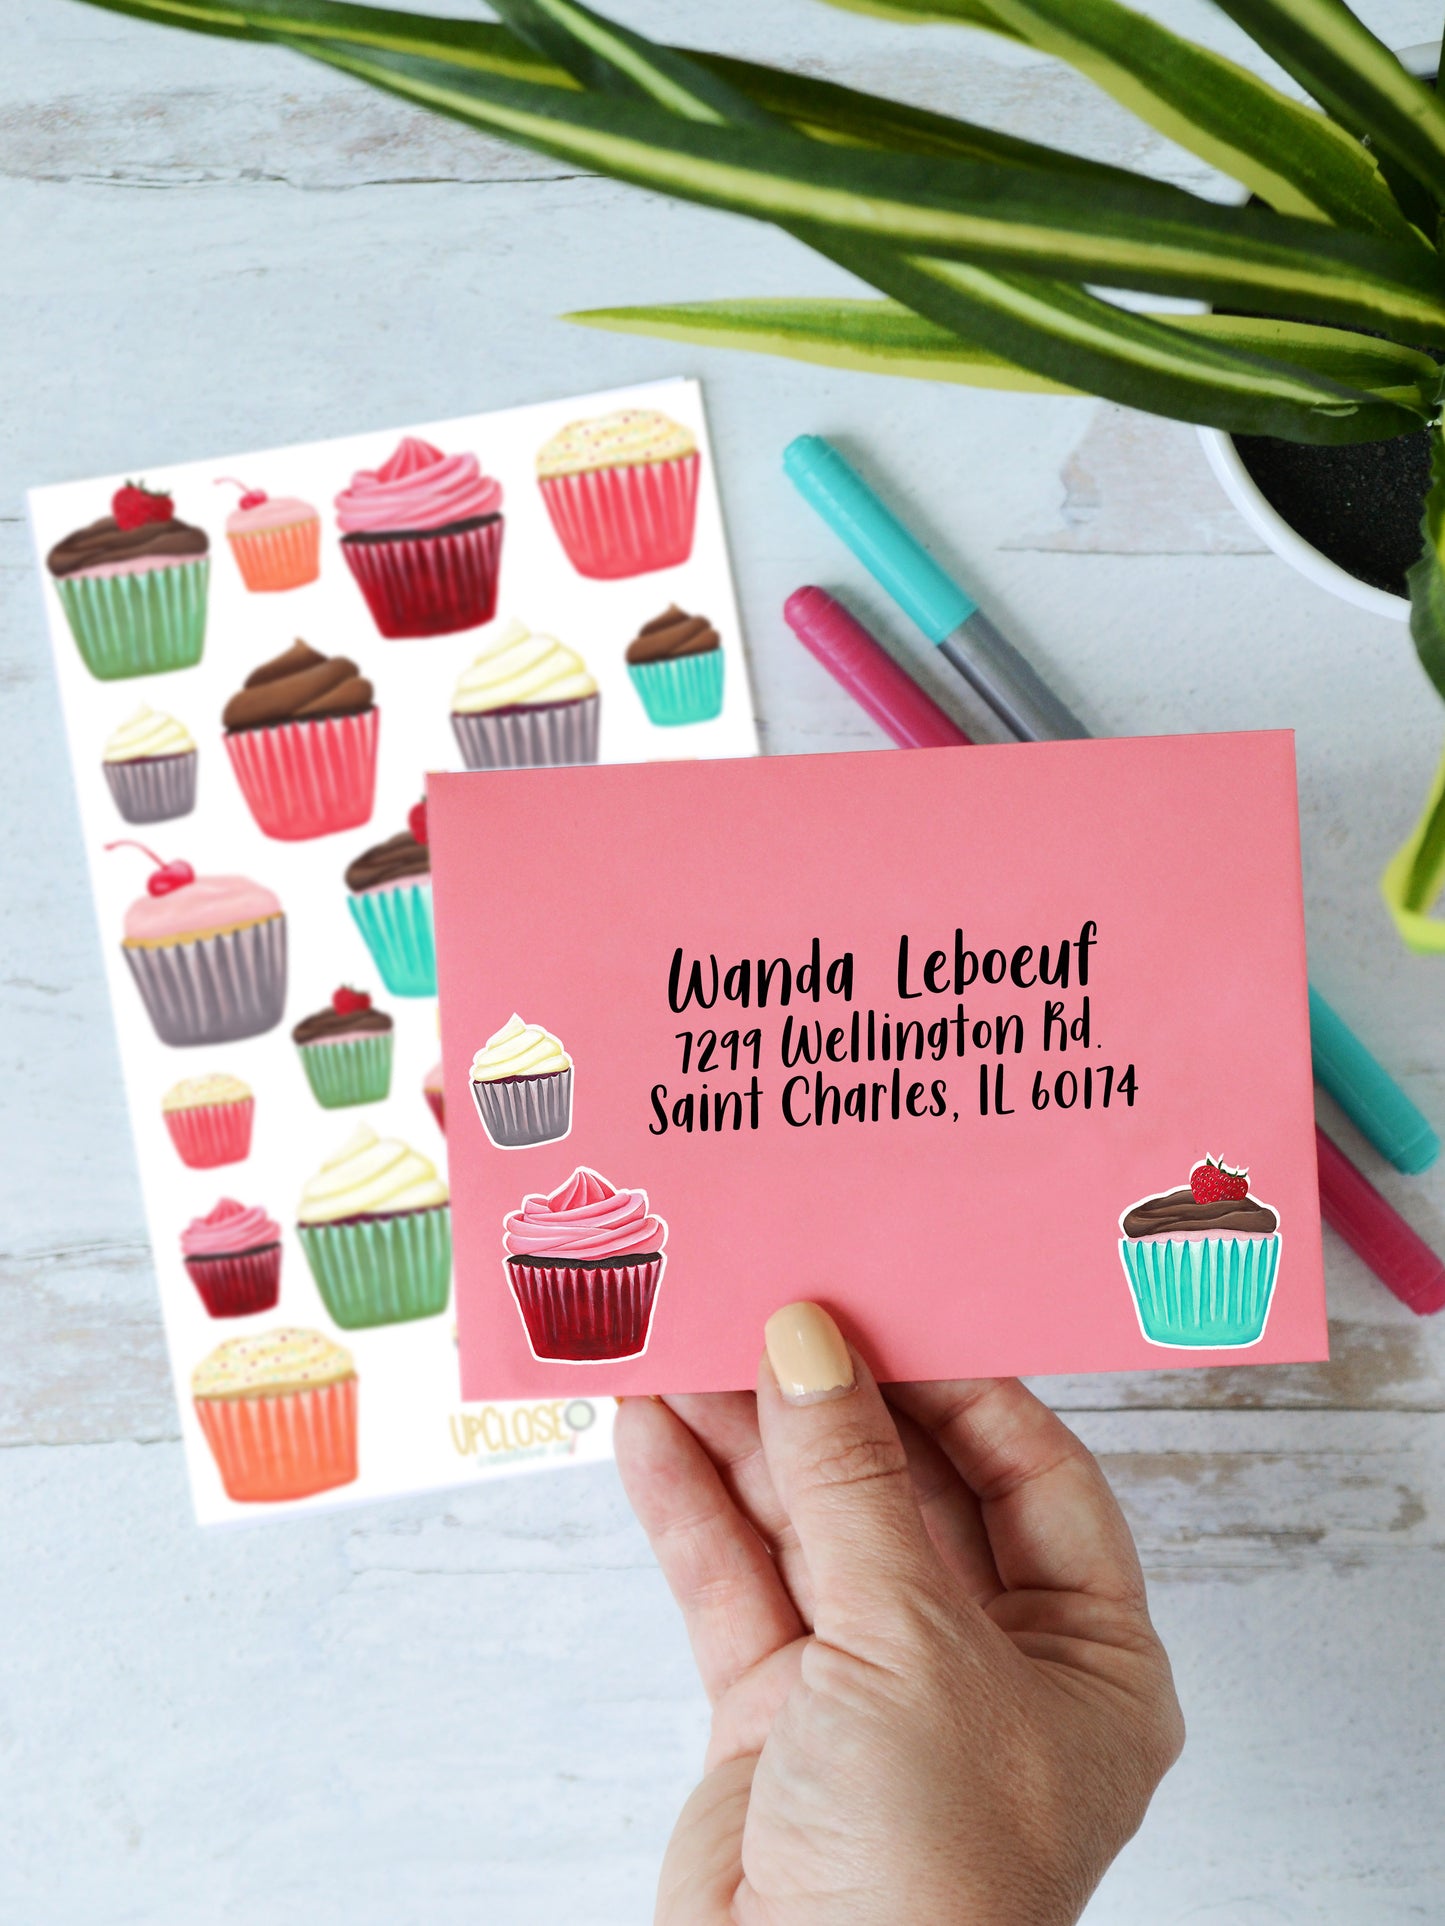 A mailing envelope decorated with a variety of cupcake stickers.